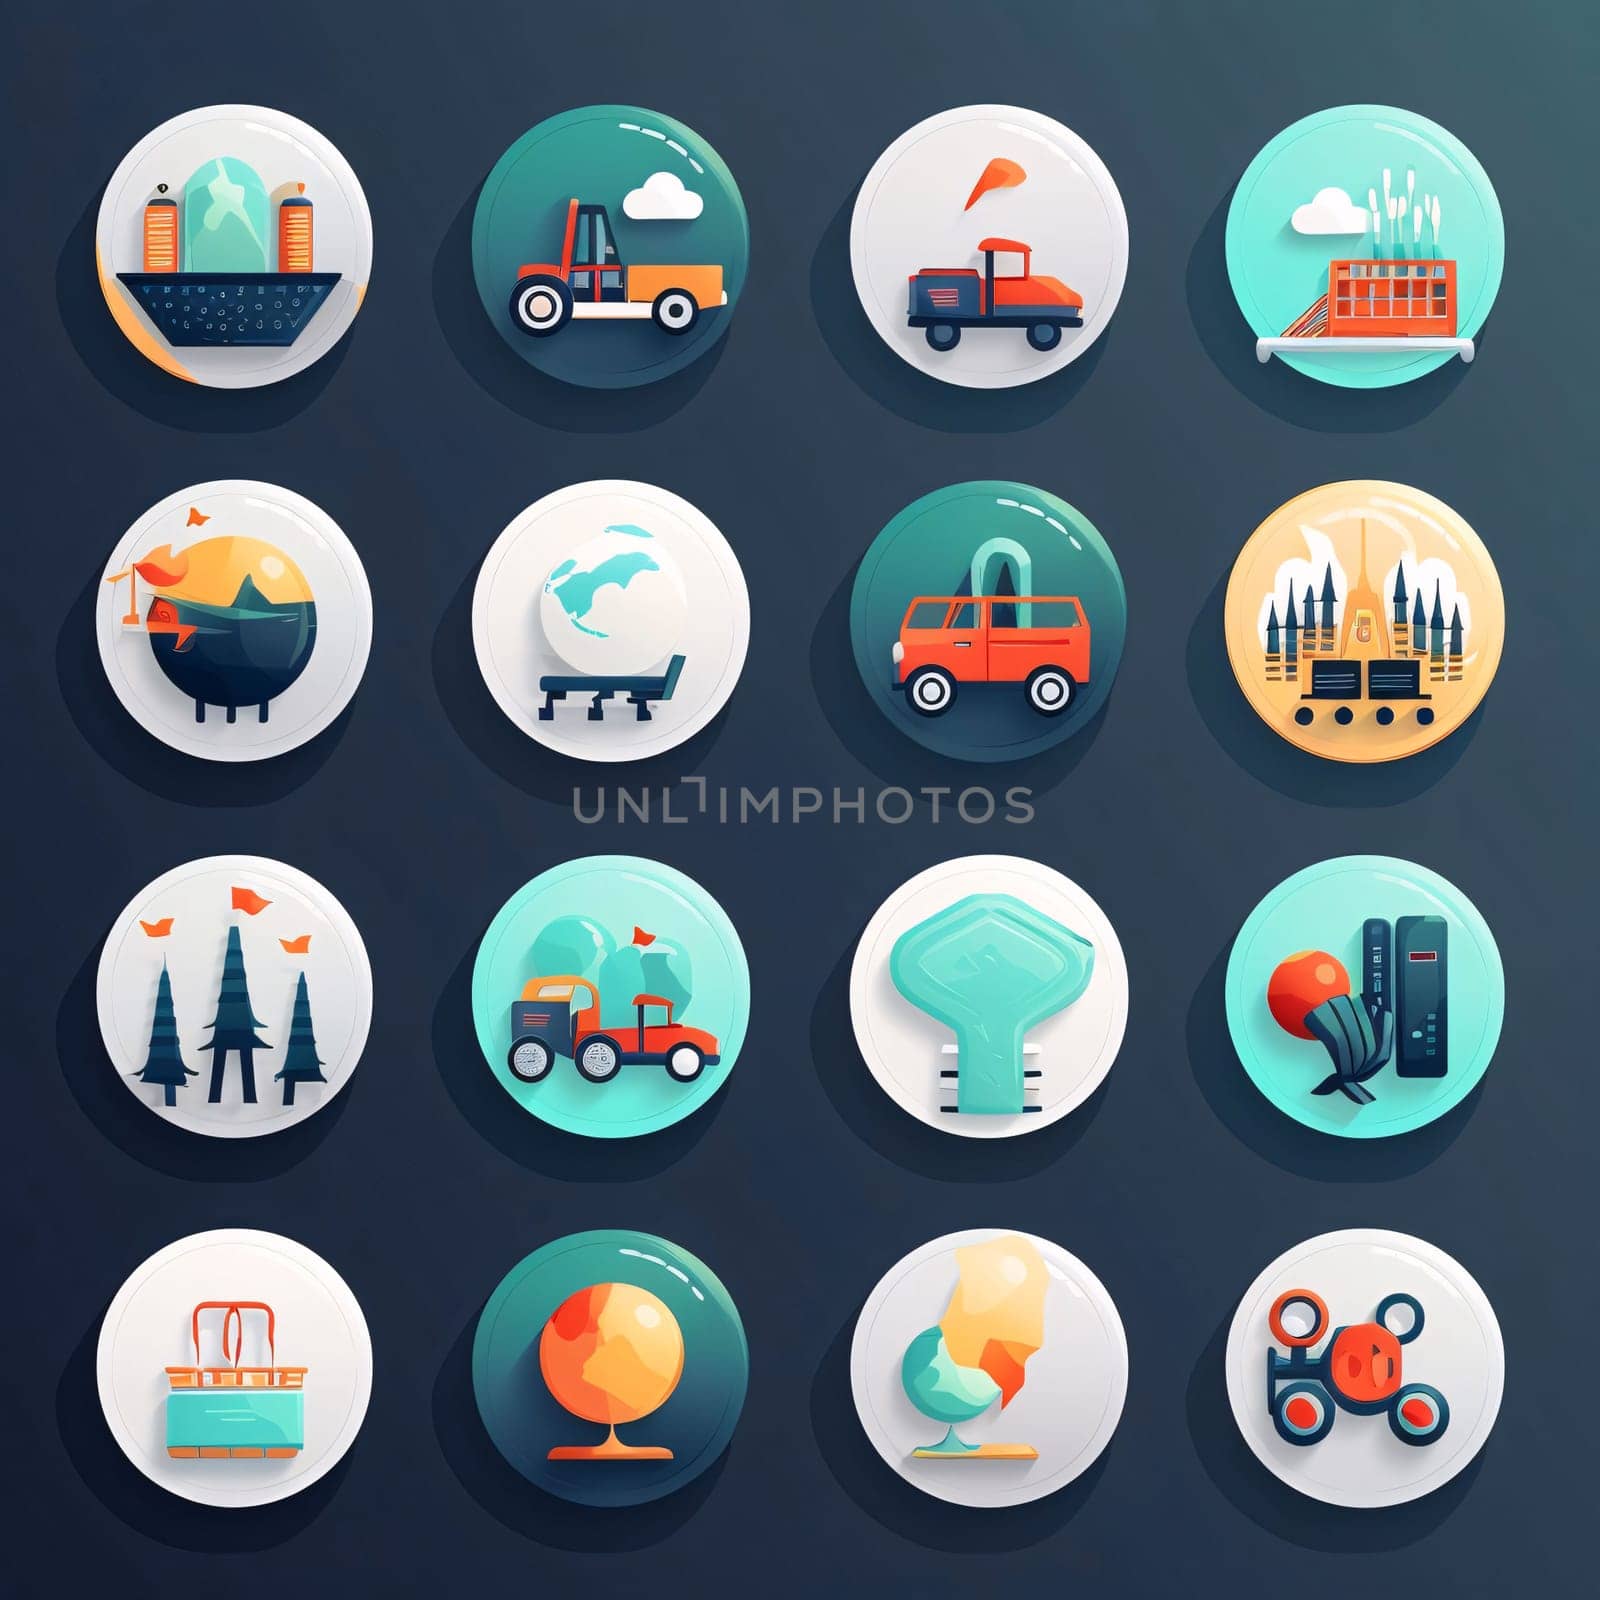 New icons collection: Set of flat icons on the theme of travel and tourism. Vector illustration